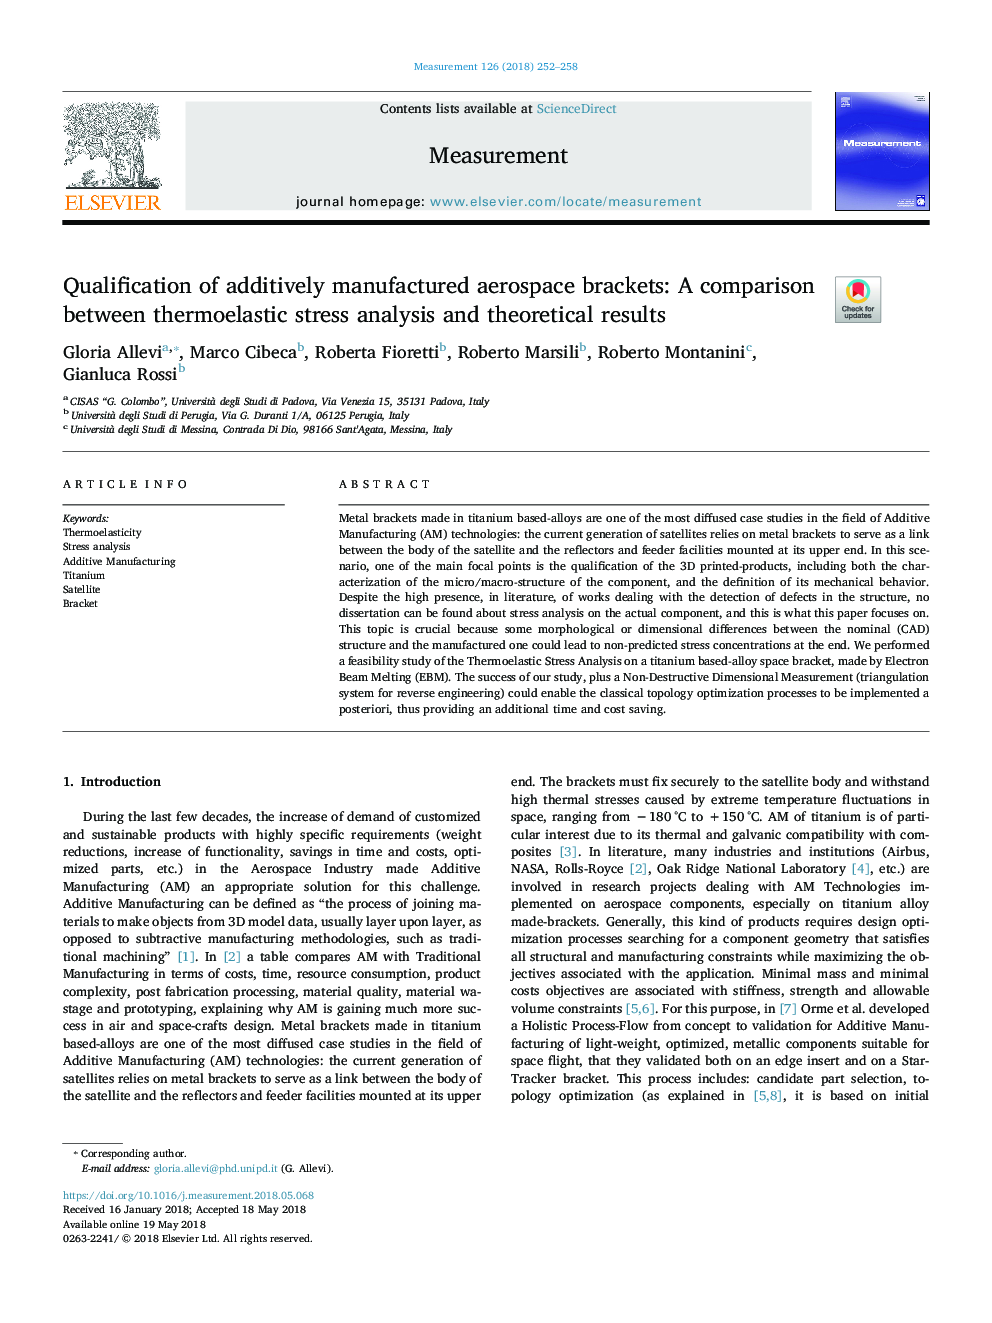 Qualification of additively manufactured aerospace brackets: A comparison between thermoelastic stress analysis and theoretical results